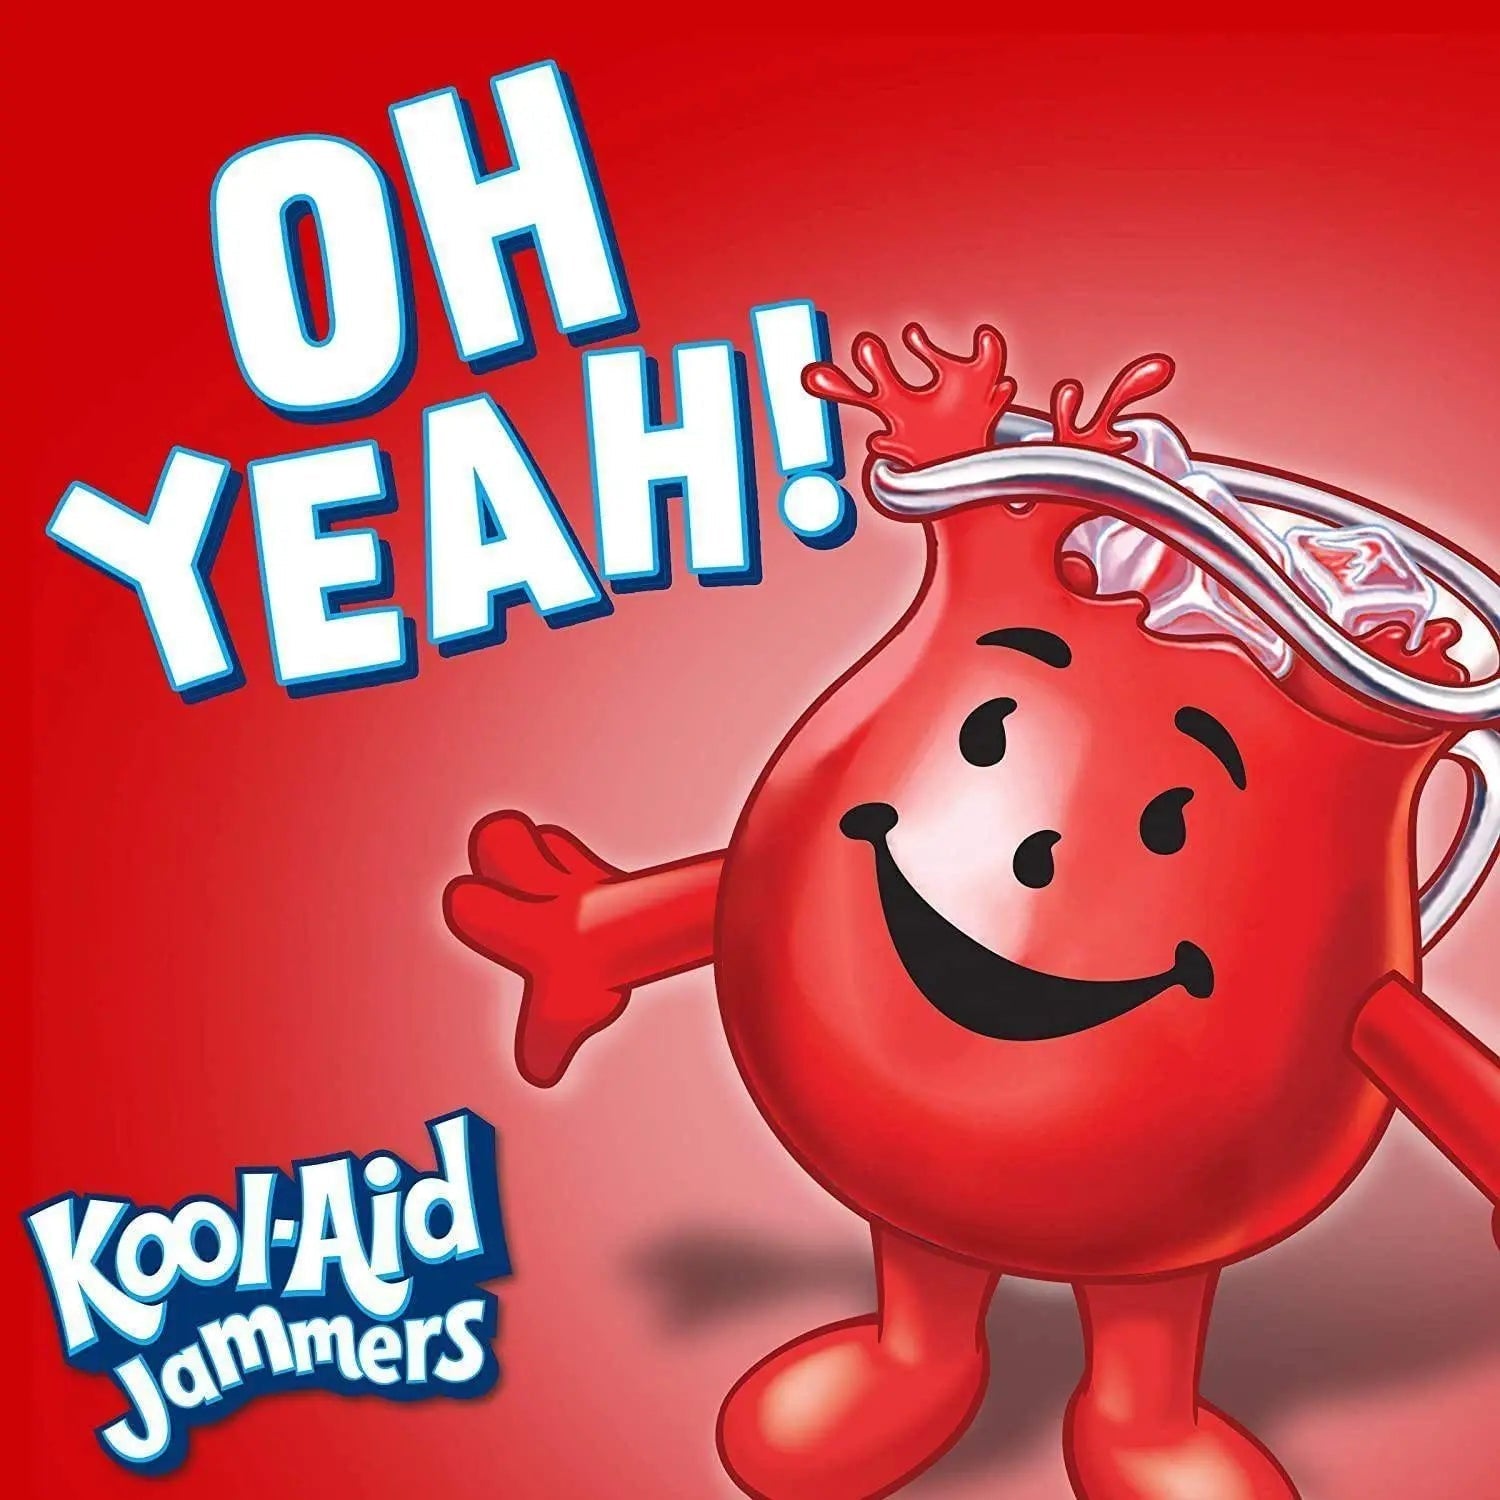 Wholesale prices with free shipping all over United States Kool-Aid Jammers Cherry, Grape, Tropical Punch & Strawberry Kiwi Flavored Drink - Steven Deals